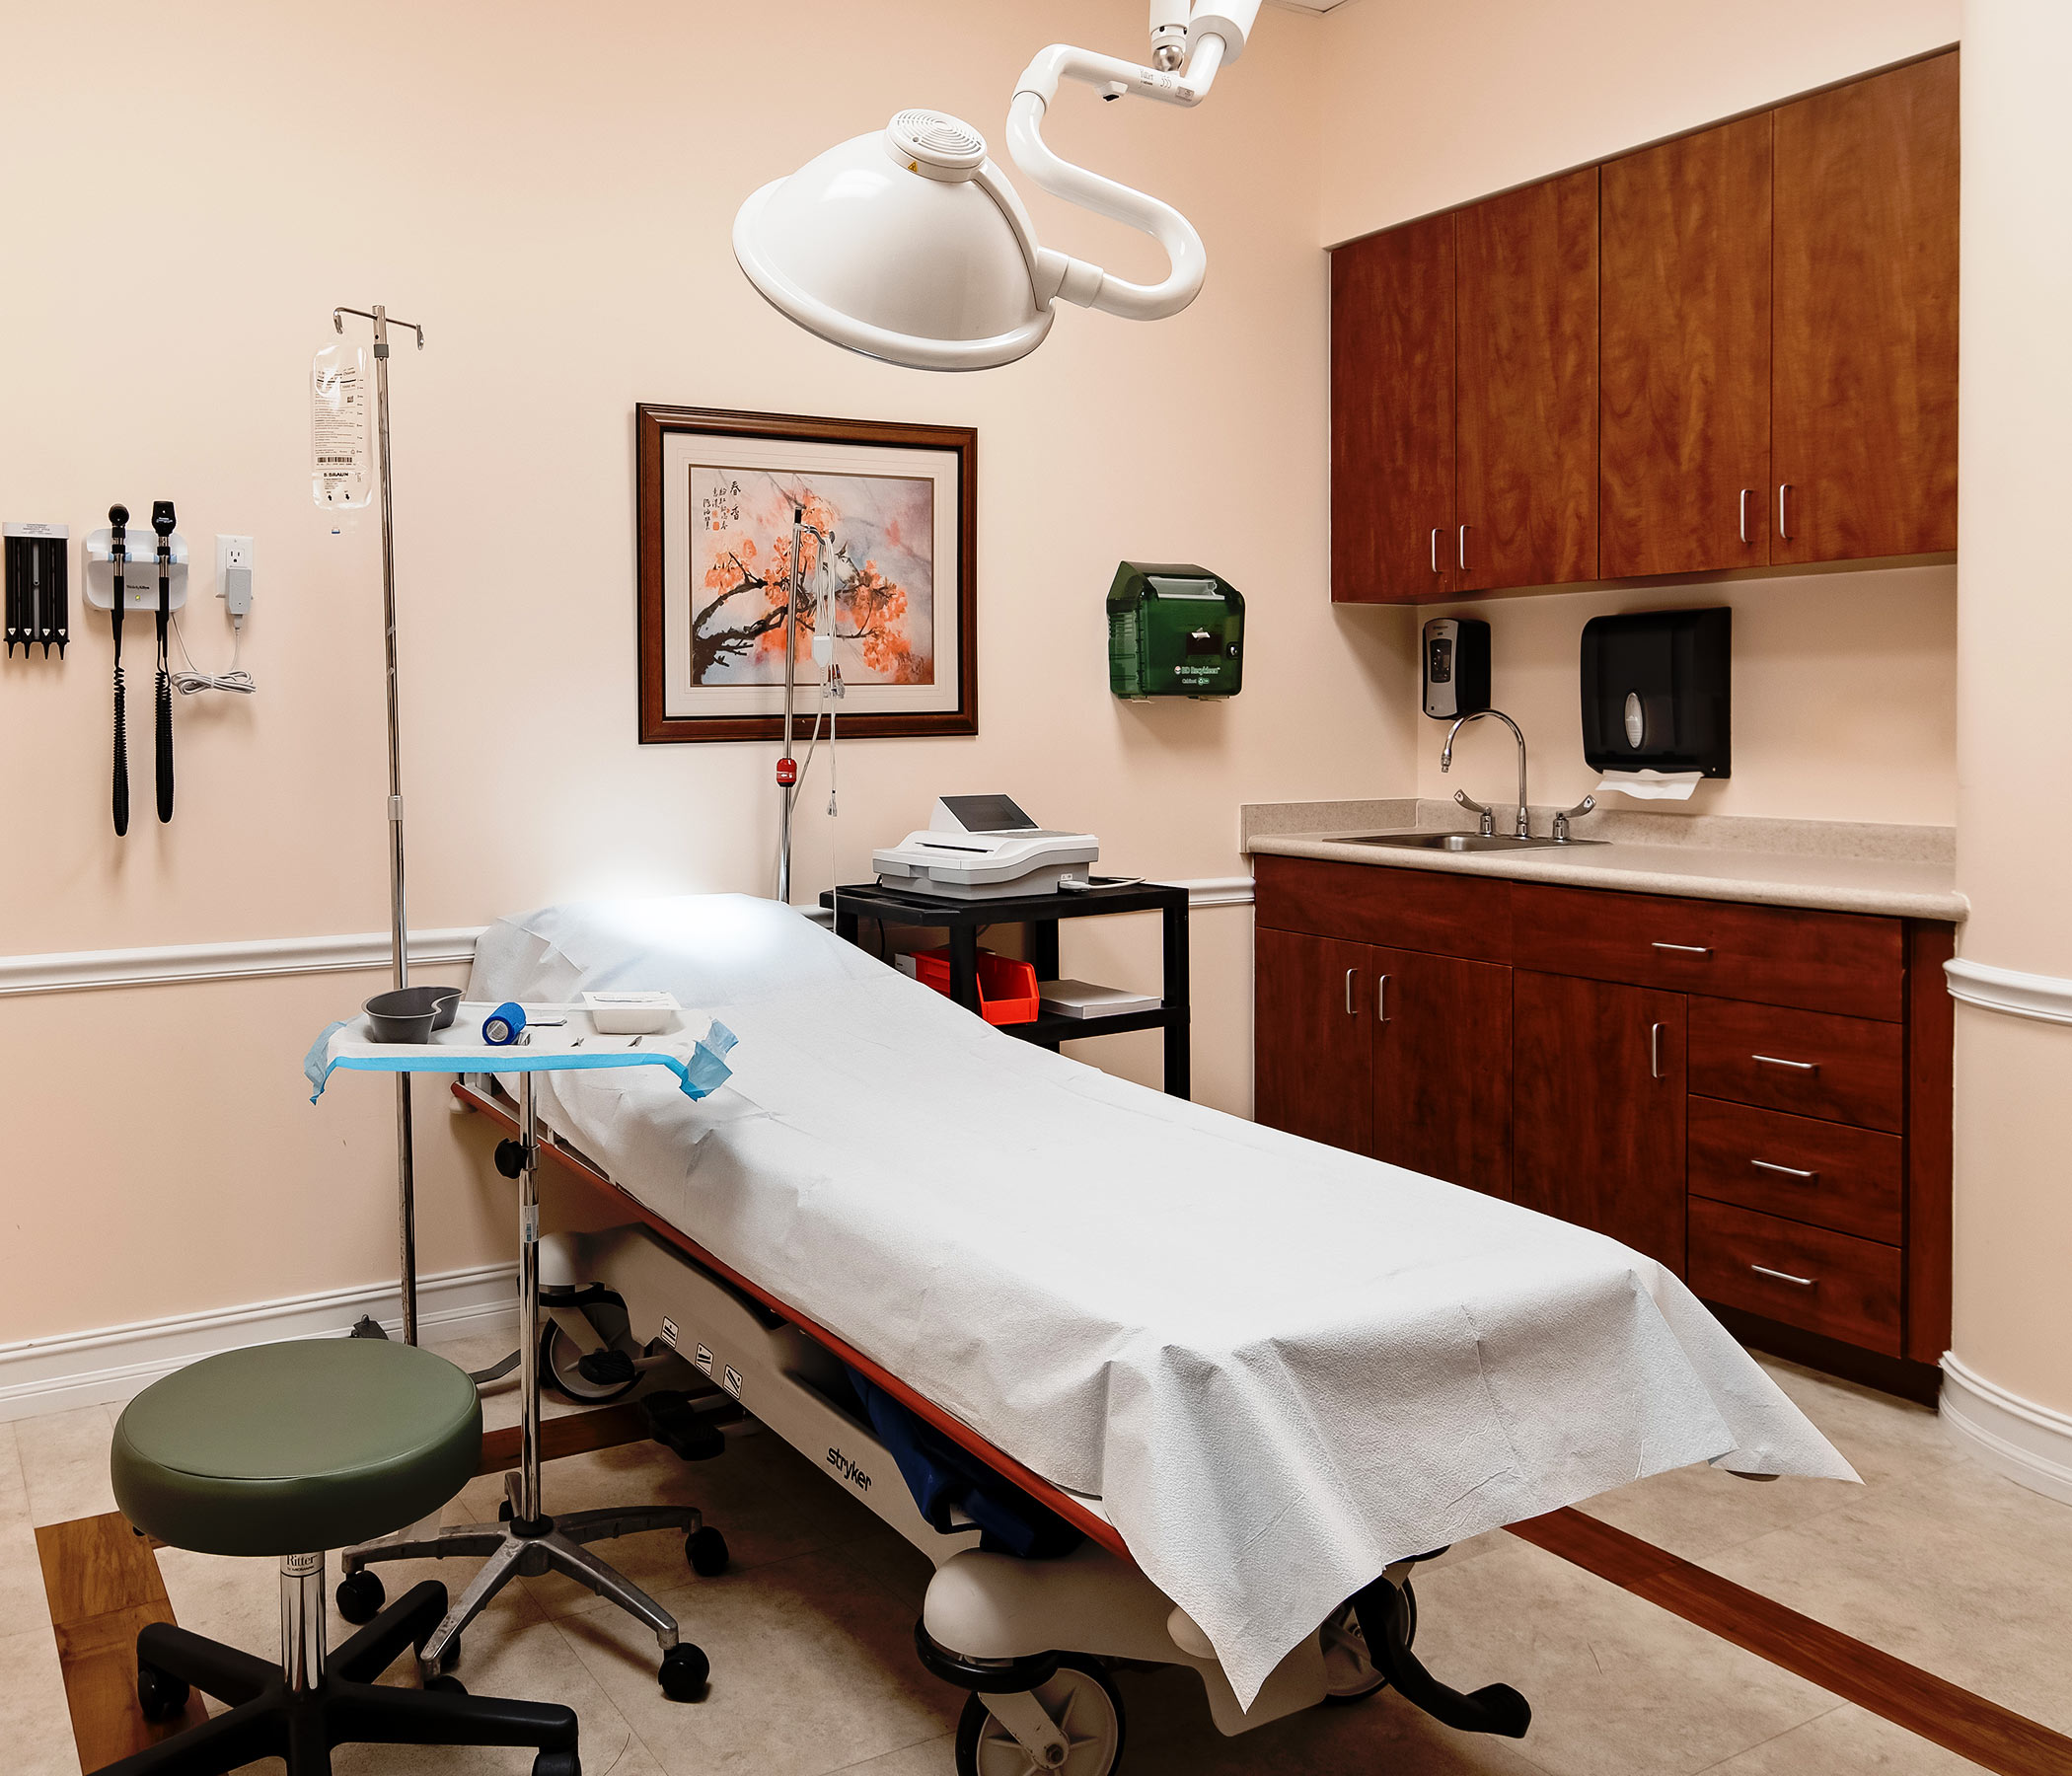 Our state-of-the-art, physician-led clinics operate around your schedule.